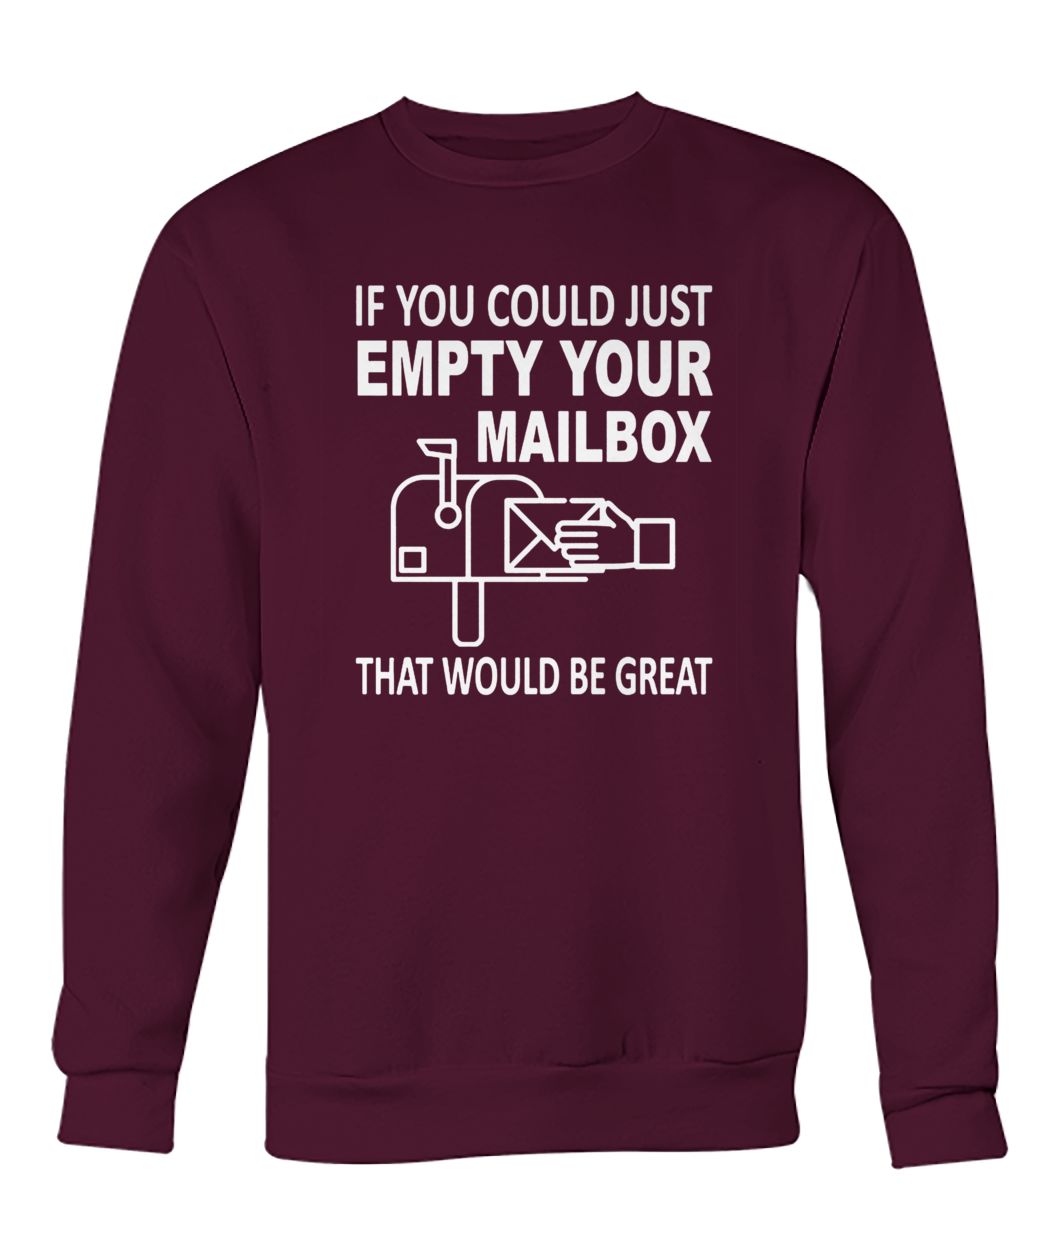 If you could just empty your mailbox that would be great crew neck sweatshirt